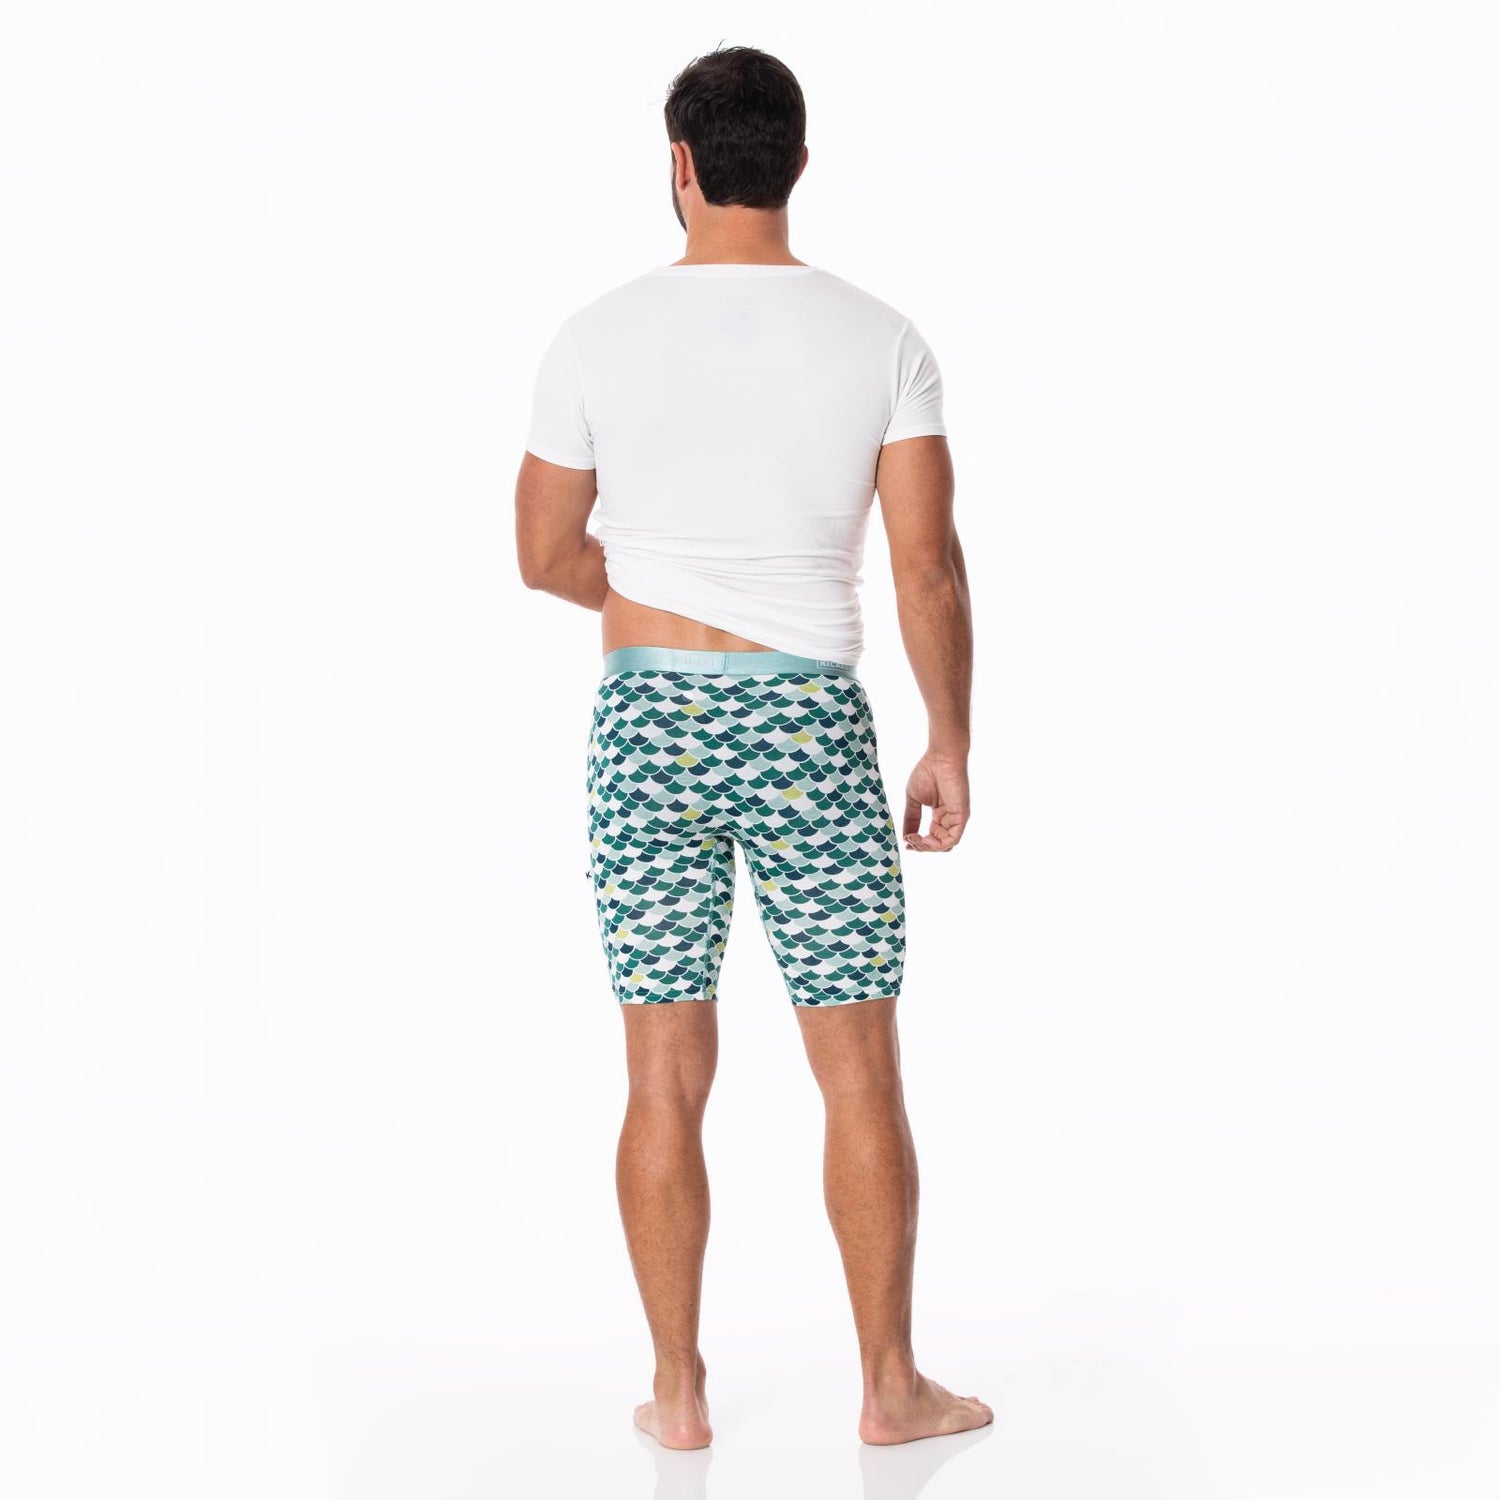 Men's Print Long Boxer Brief with Top Fly in Lagoon Scales